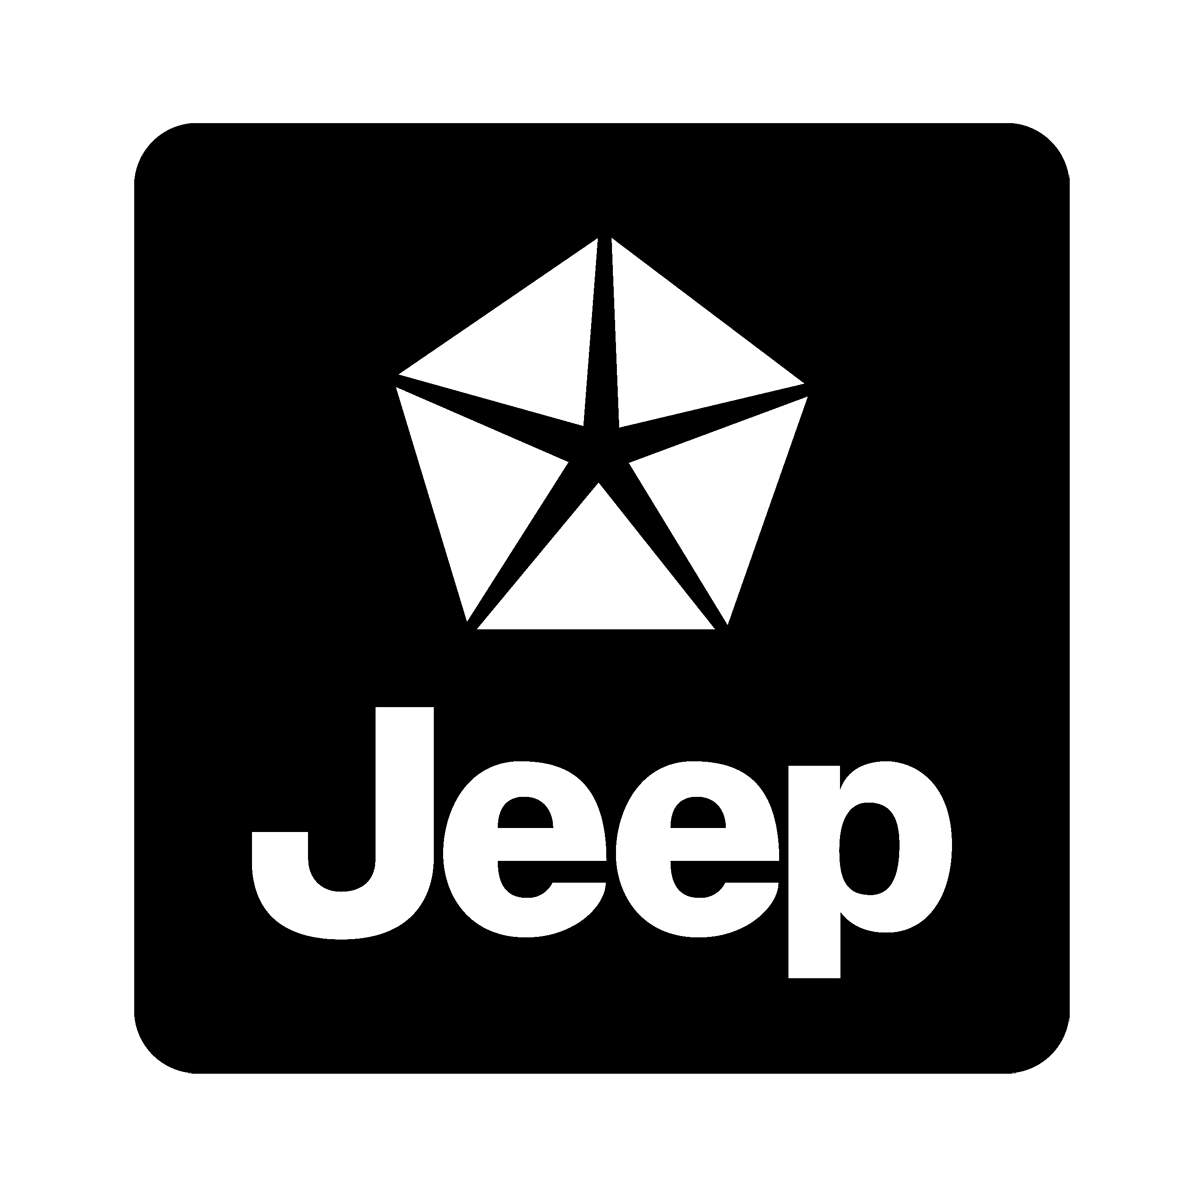 Jeep Logo 1987-1993 PNG